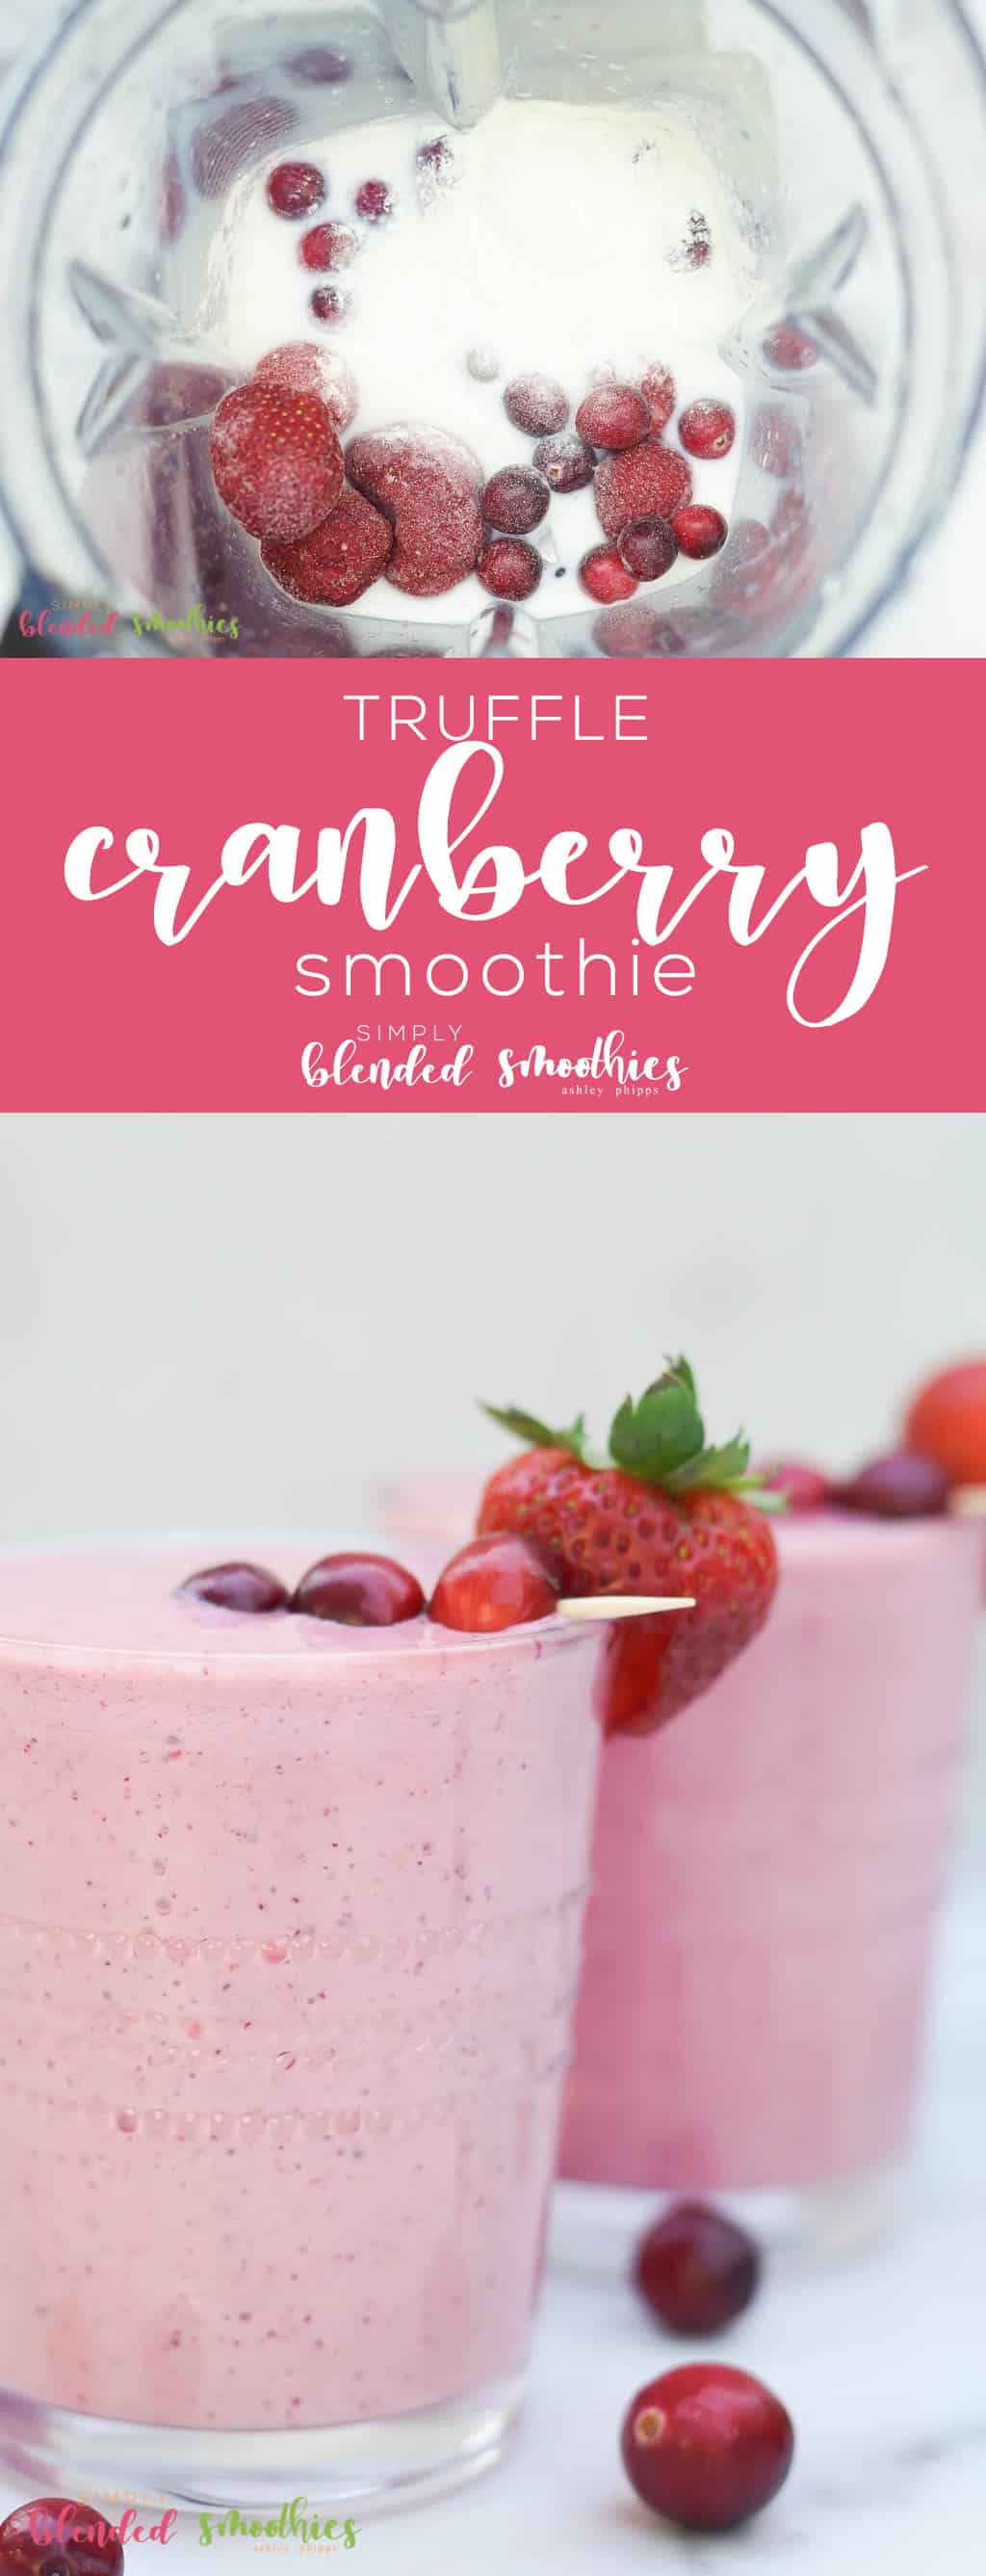 My Family Voted This Cranberry Truffle Smoothie The Best Smoothie Ever And I Could Not Agree More - It Is Super Yummy